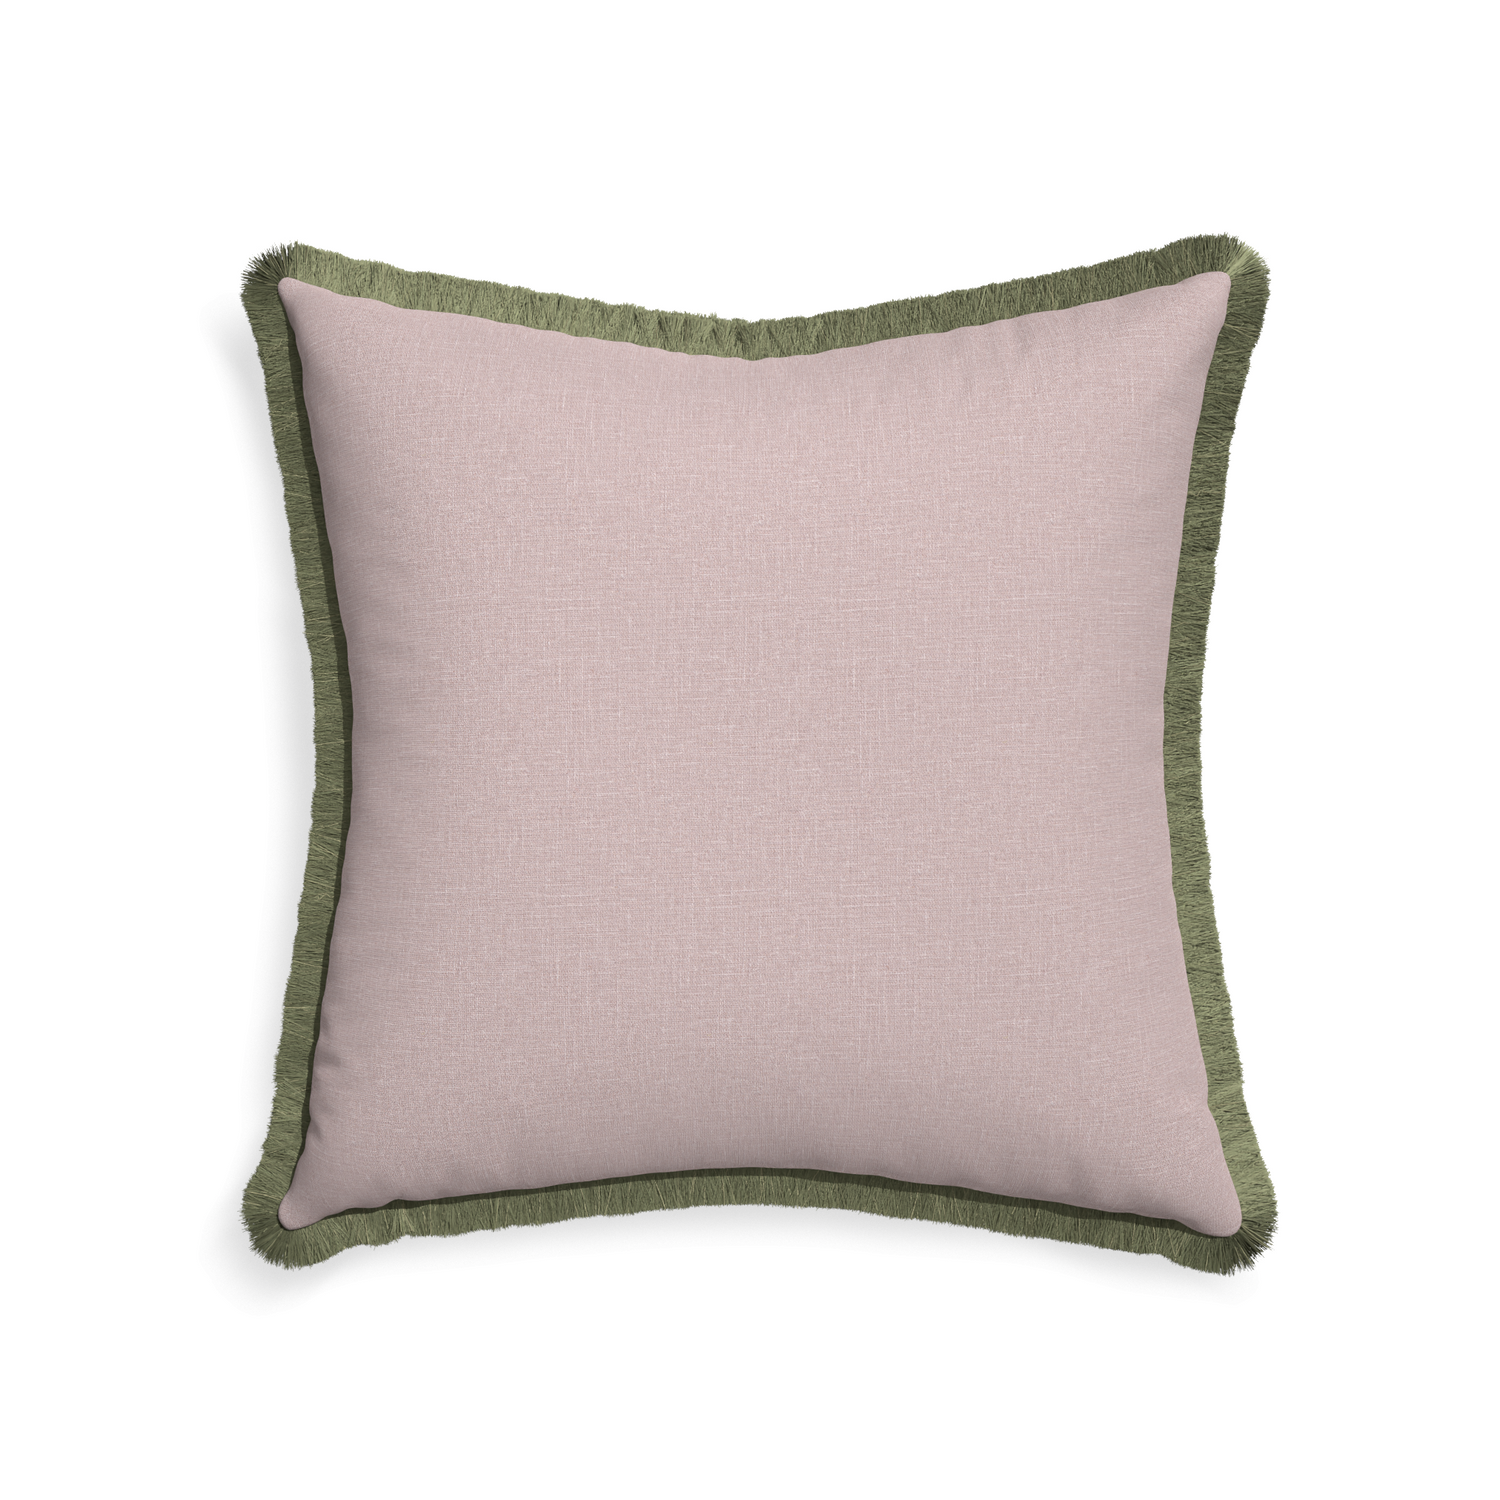 22-square orchid custom mauve pinkpillow with sage fringe on white background